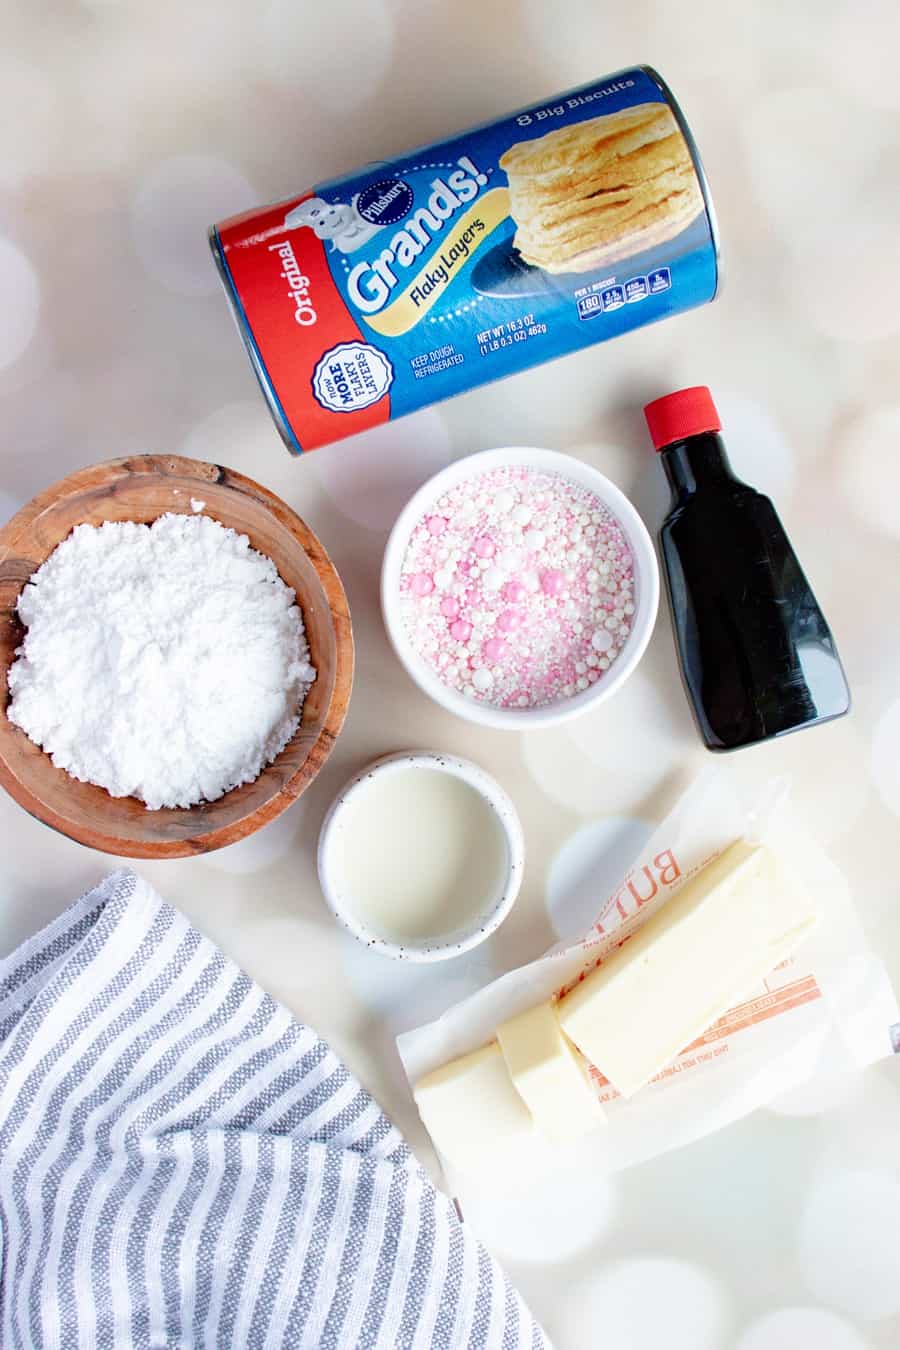 ingredients for air fryer donuts using biscuit dough